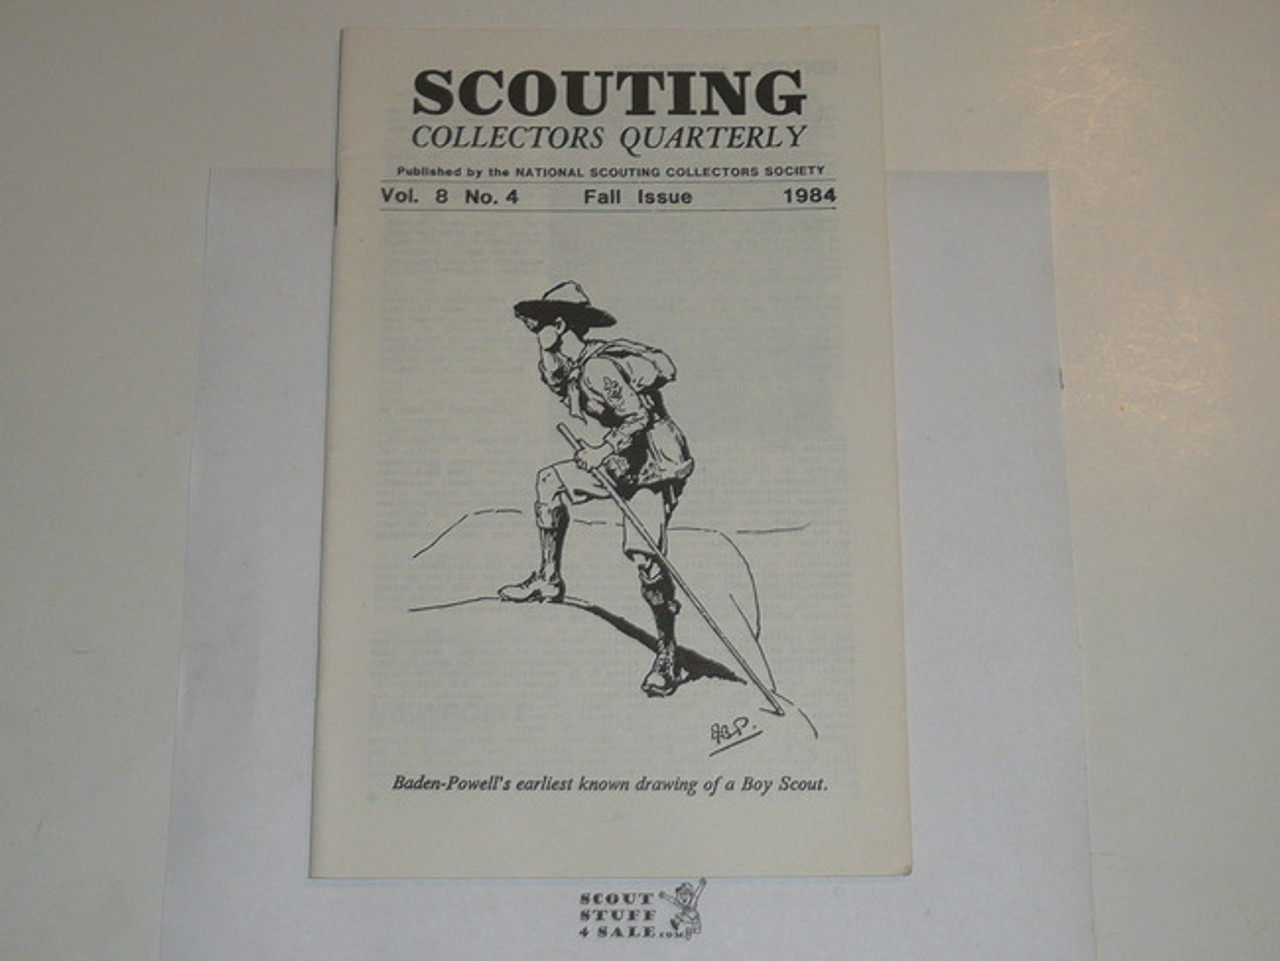 Scouting Collecters Quarterly Newsletter, 1984 Fall, Vol 8 #4